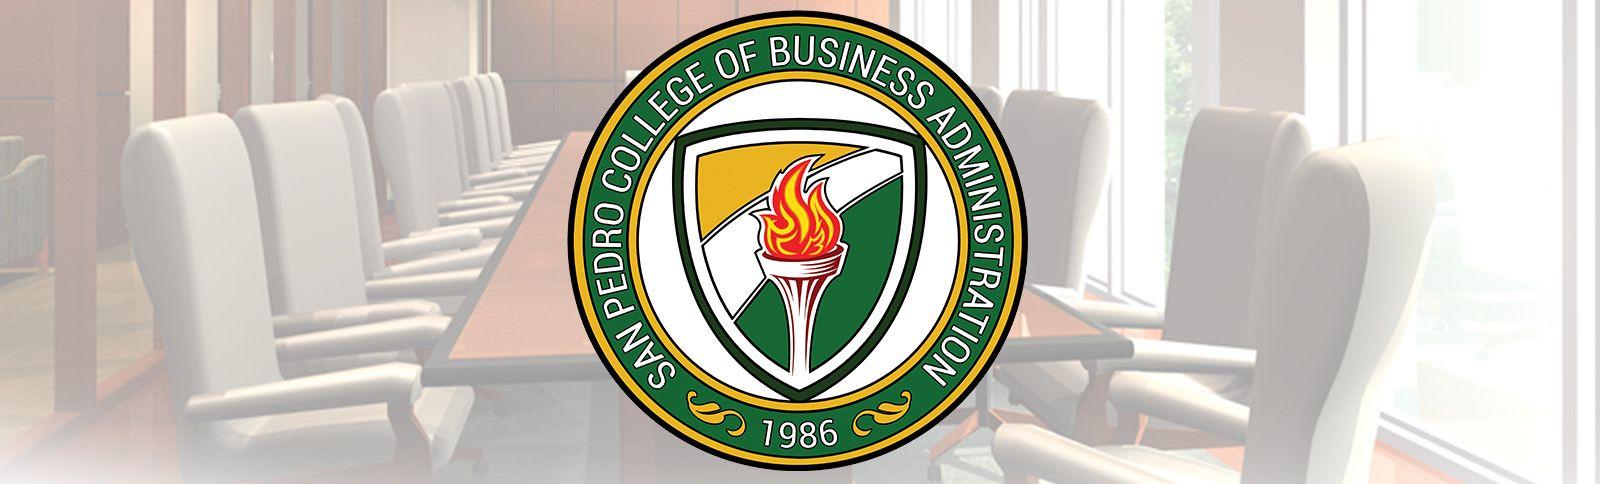 Administration Logo - San Pedro College of Business Administration